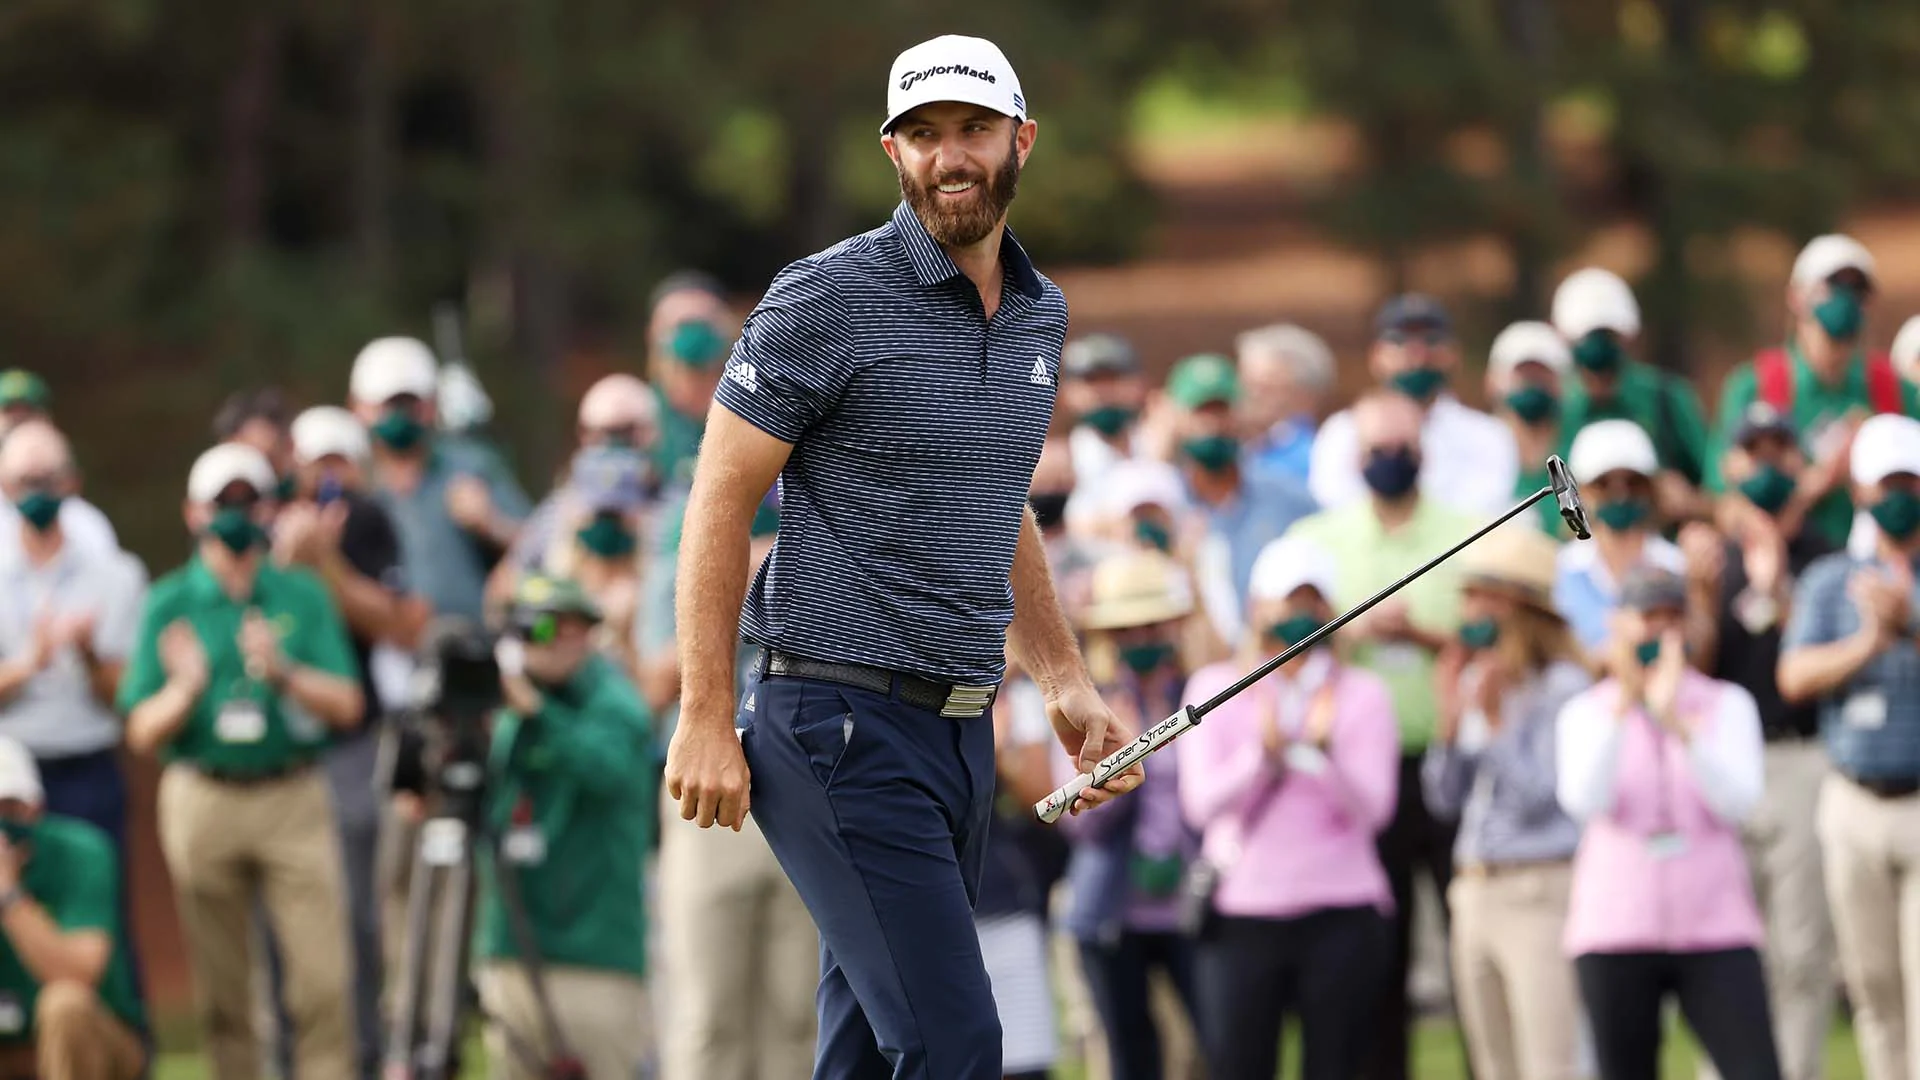 Sentry TOC odds: Dustin Johnson the betting favorite to win at Kapalua